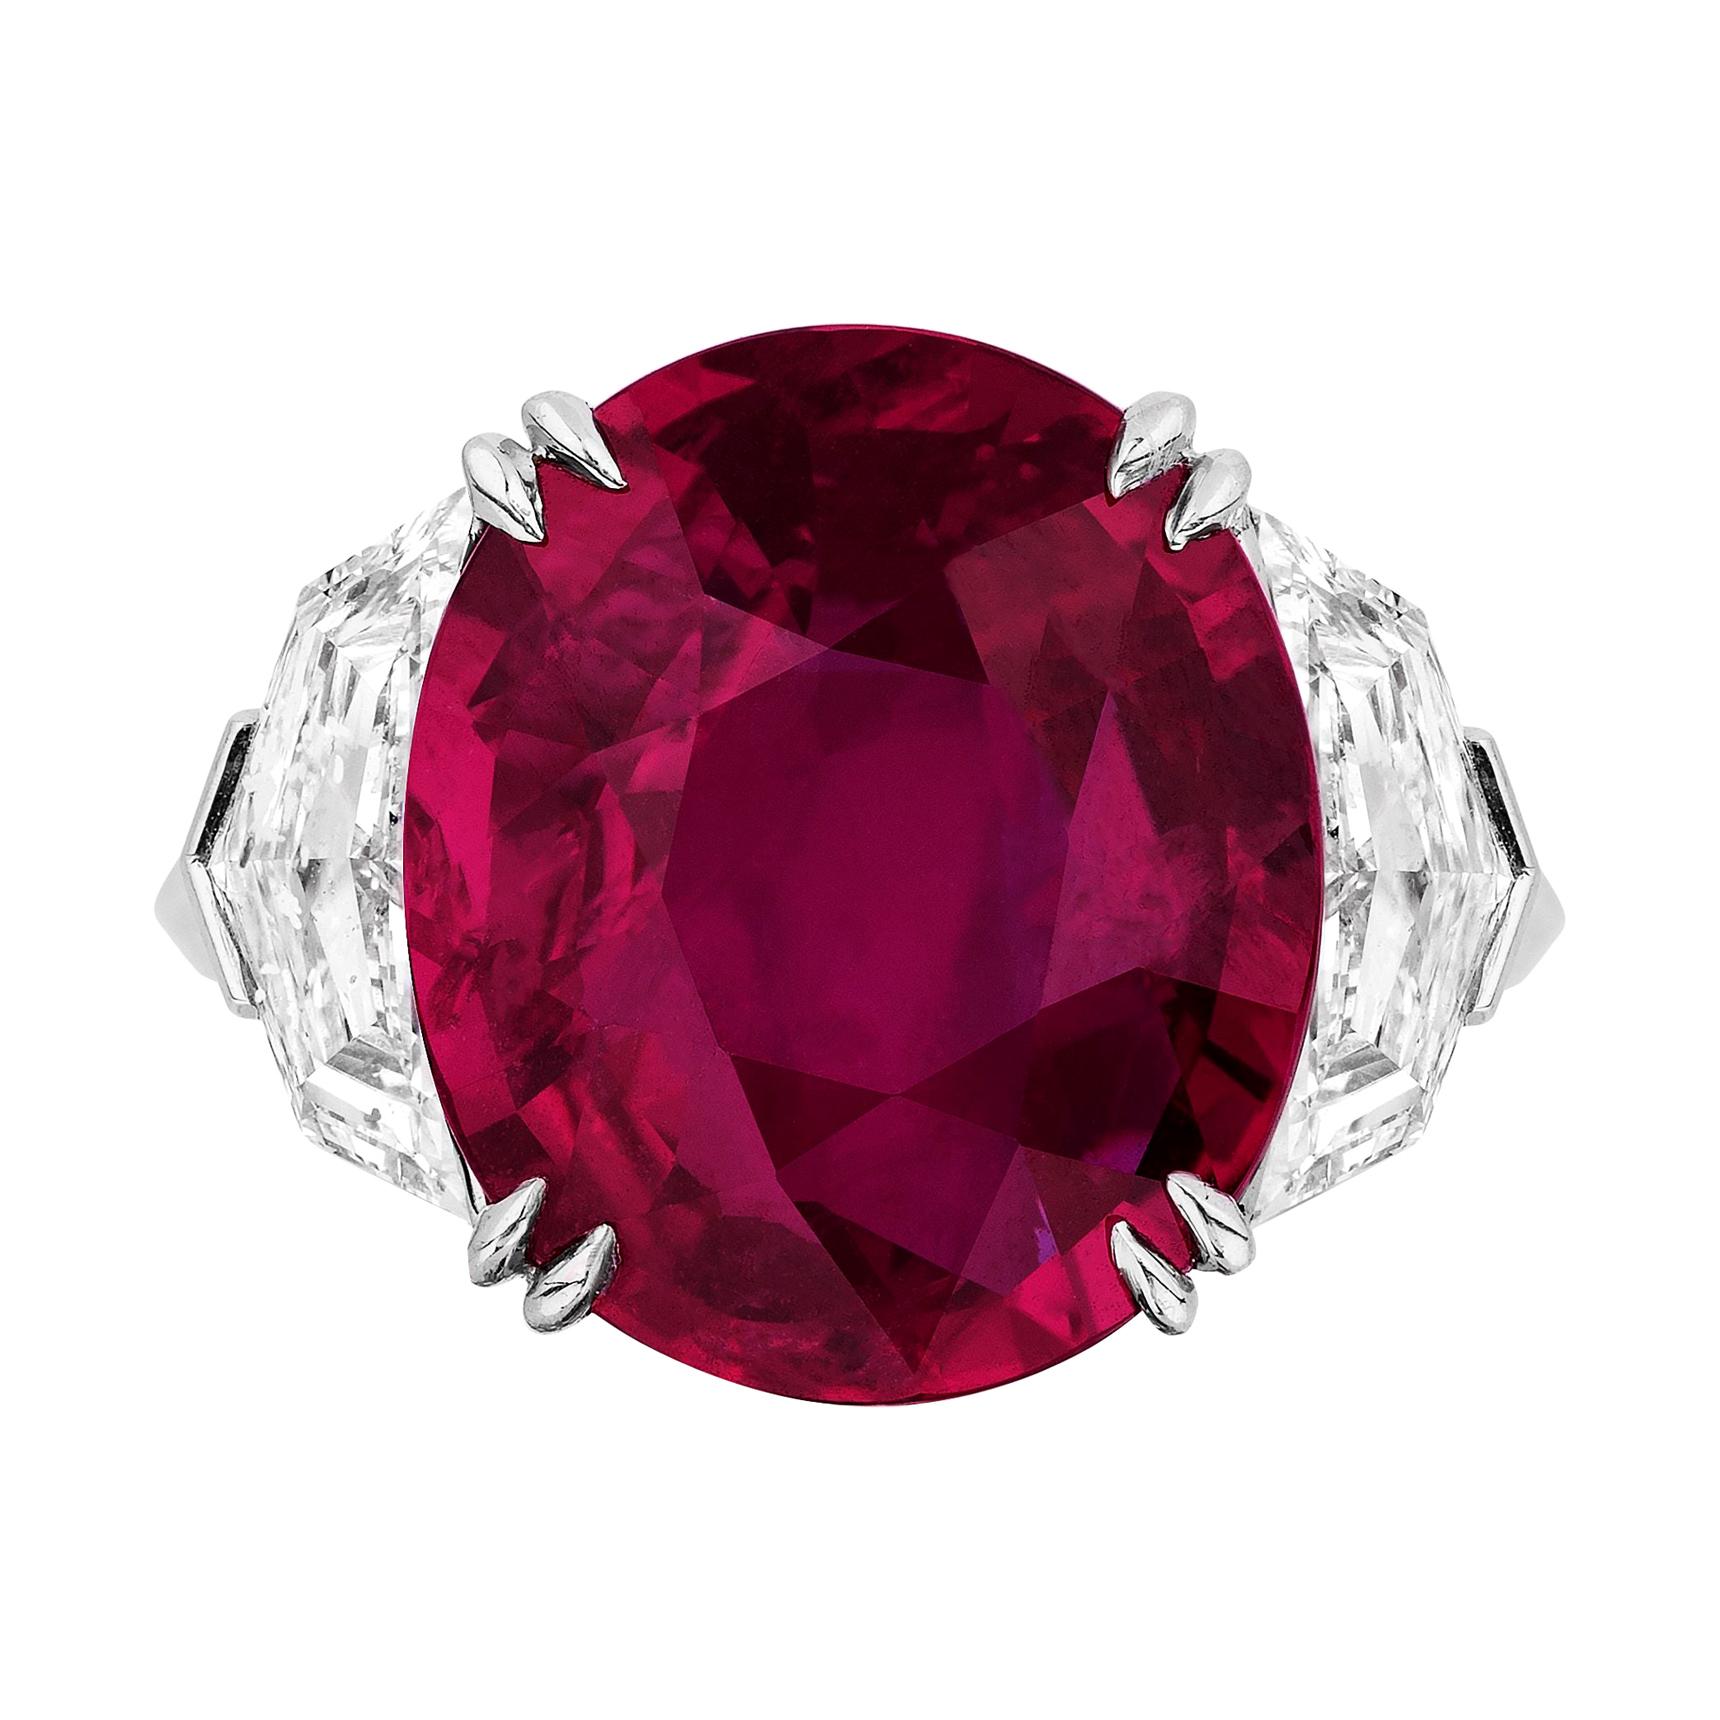 GIA Certified 10.07 Carat Mozambque Ruby Diamond Cocktail Ring 